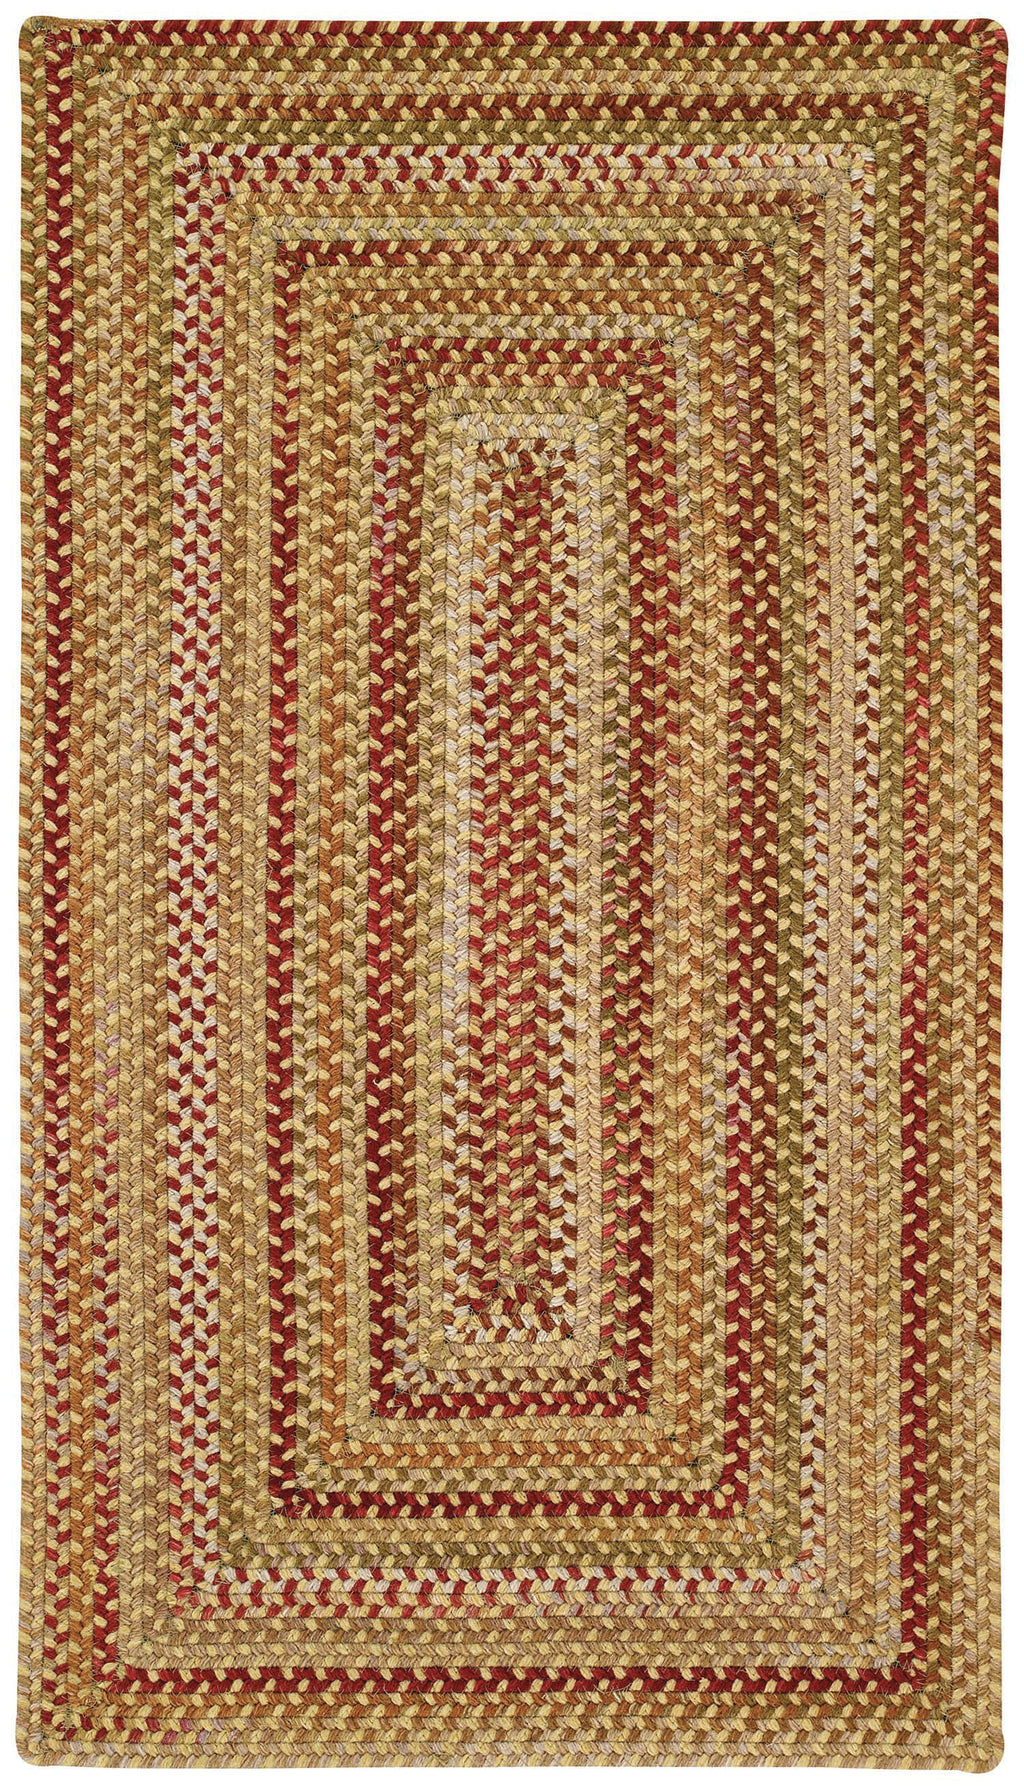 Capel Manchester 0048 Gold Hues 100 Area Rug main image